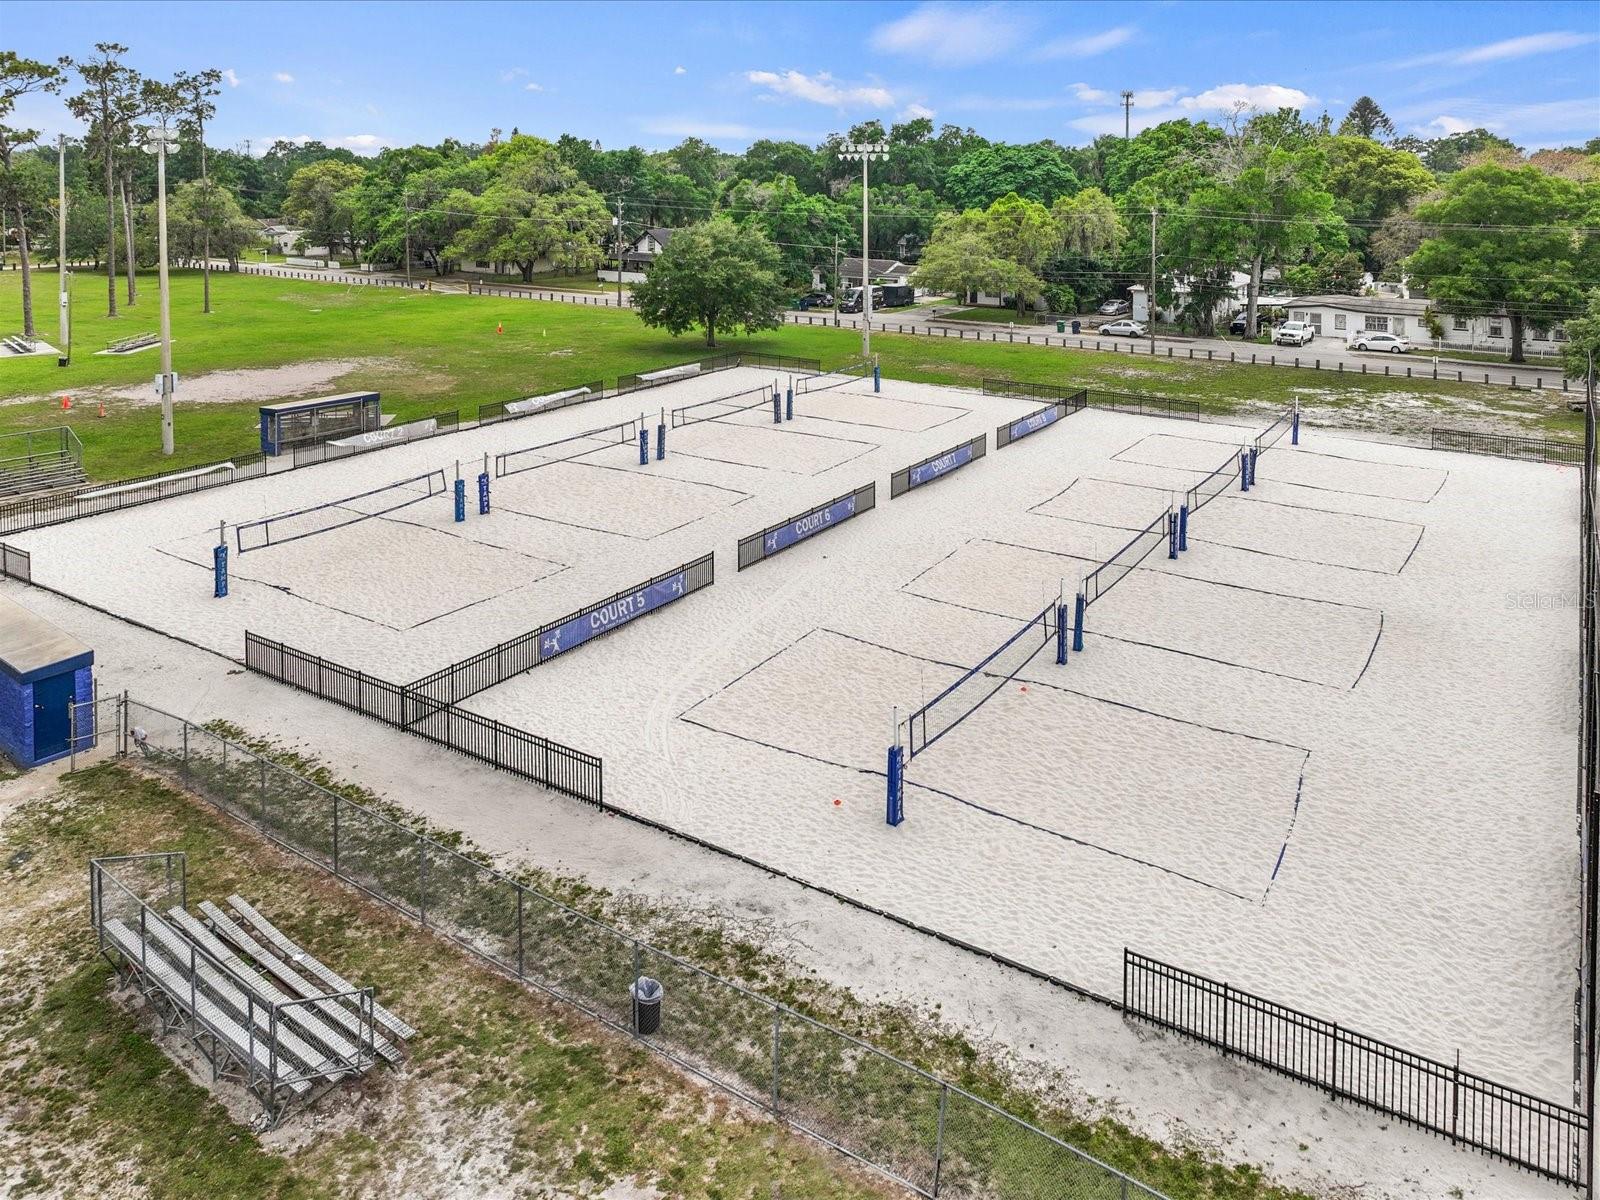 Sand Vollyball Courts at McDugald Park